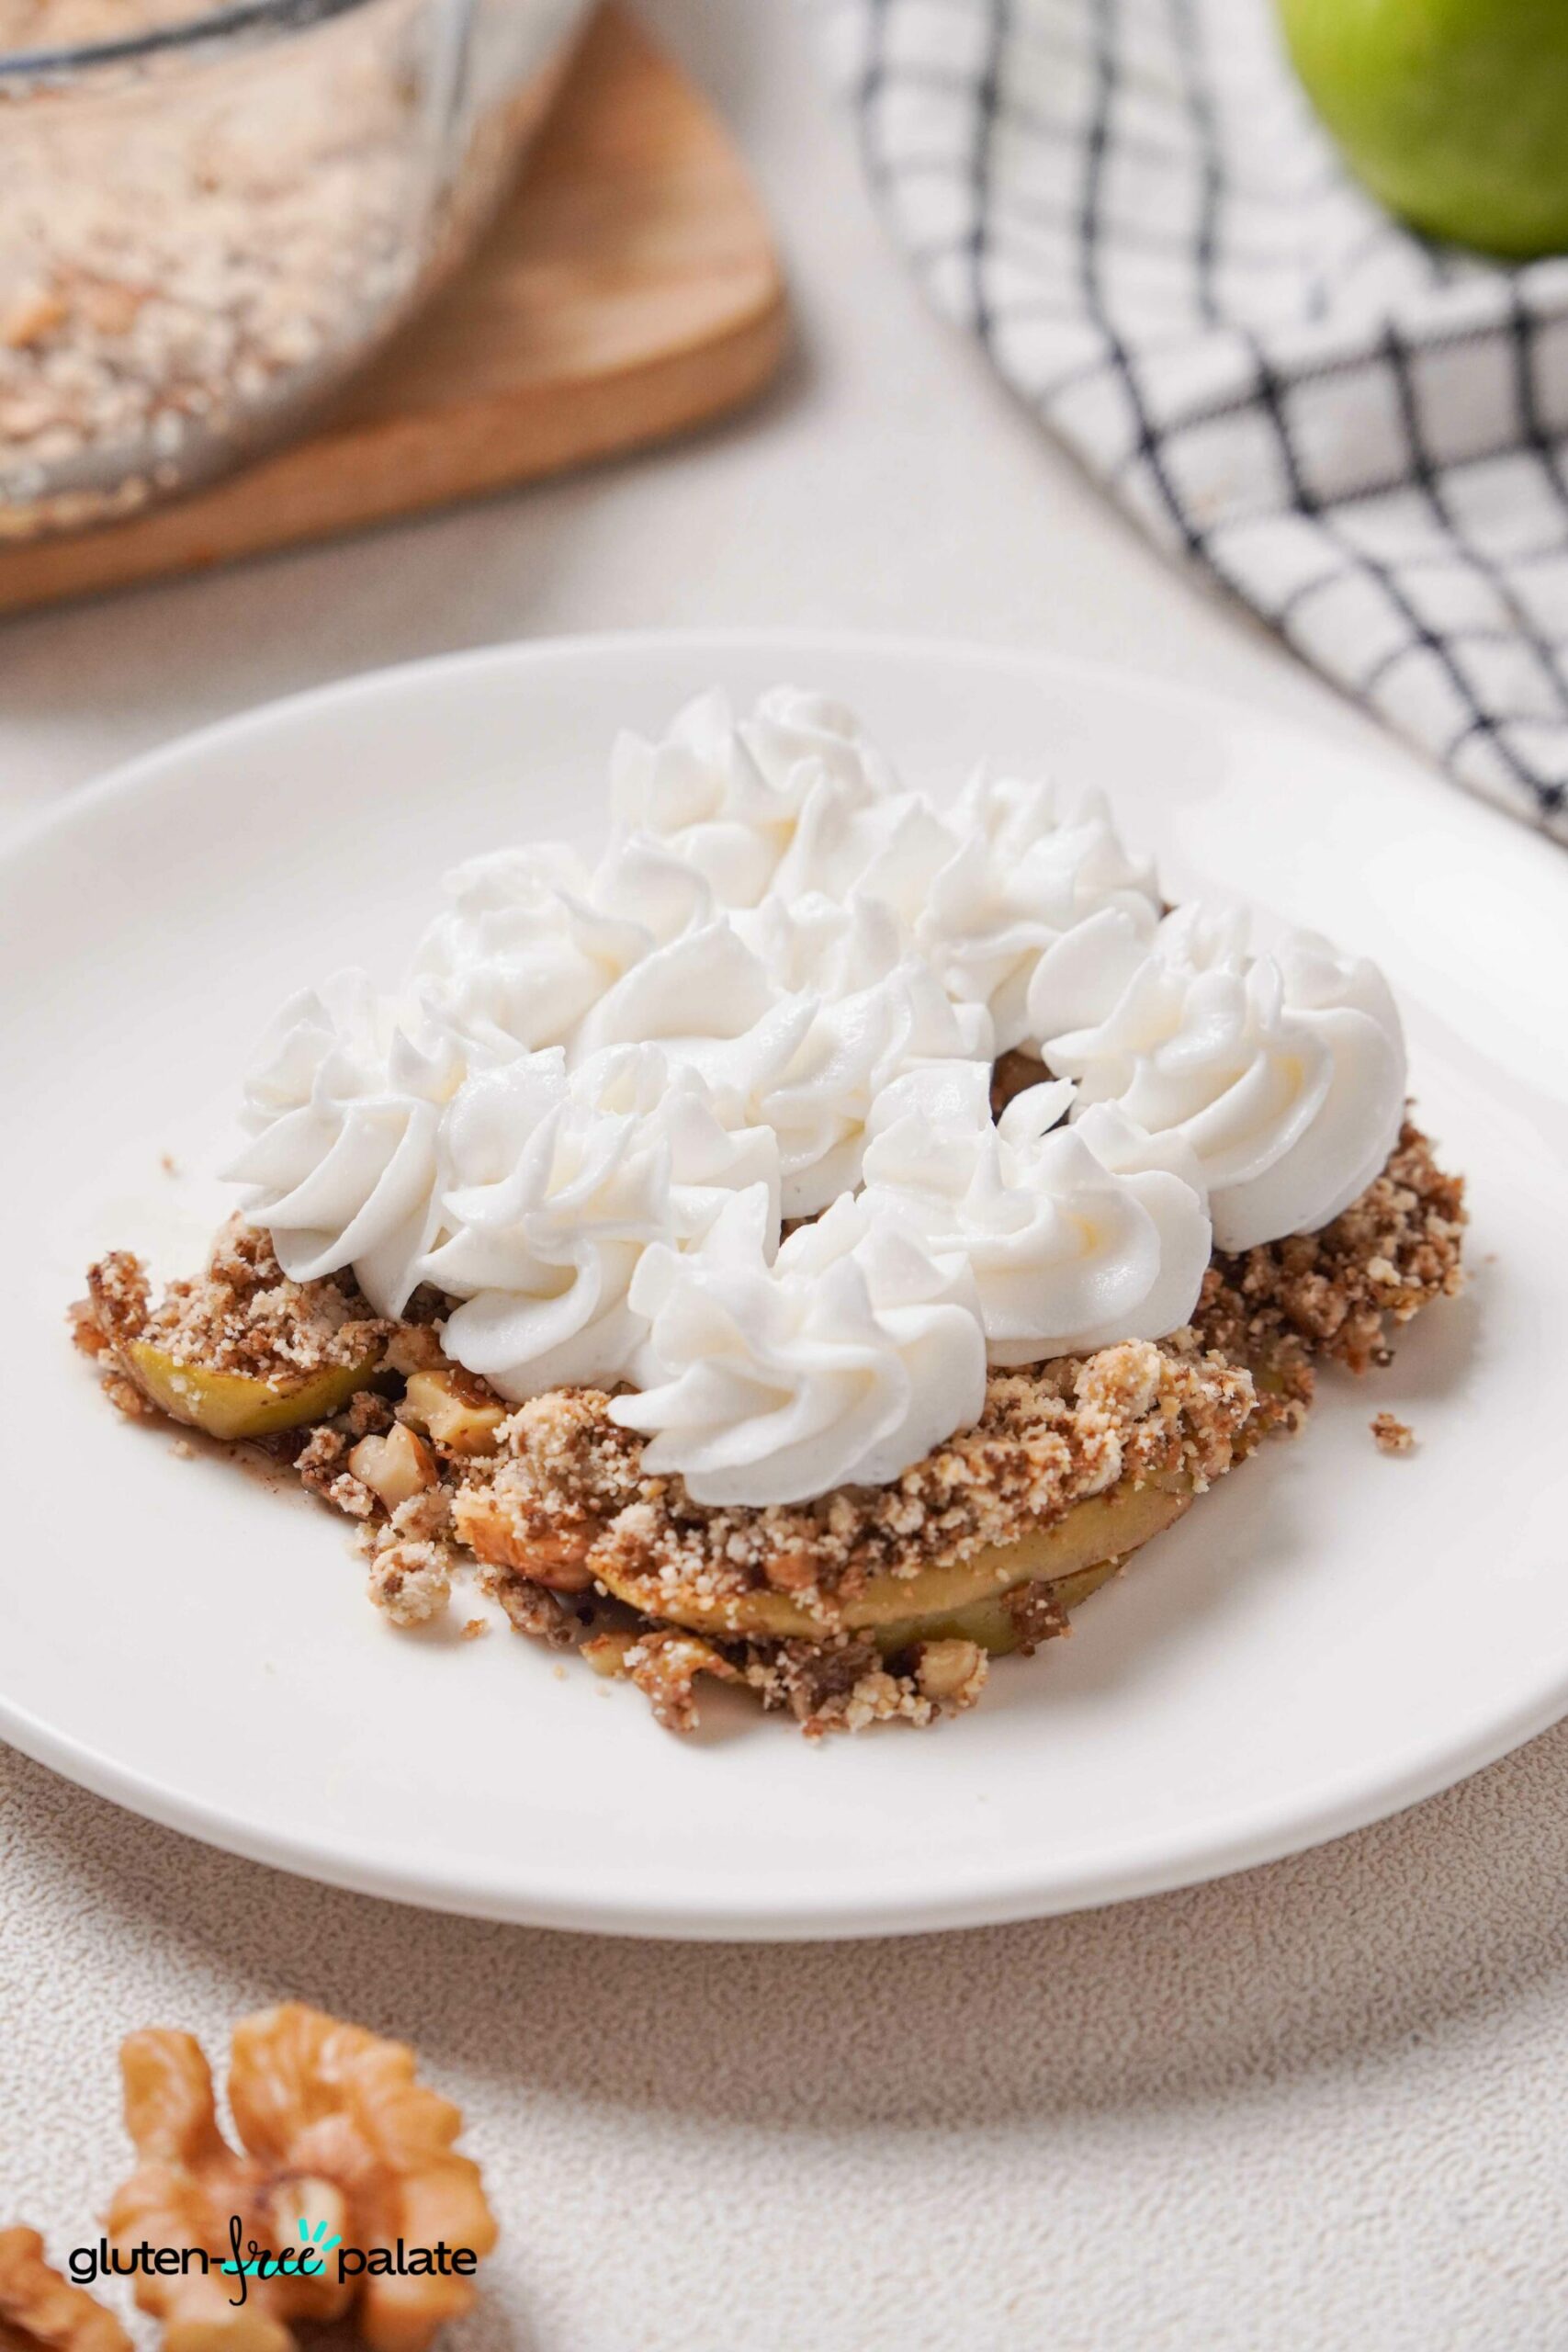 gluten-free apple crumble on a white plate with cream on top.